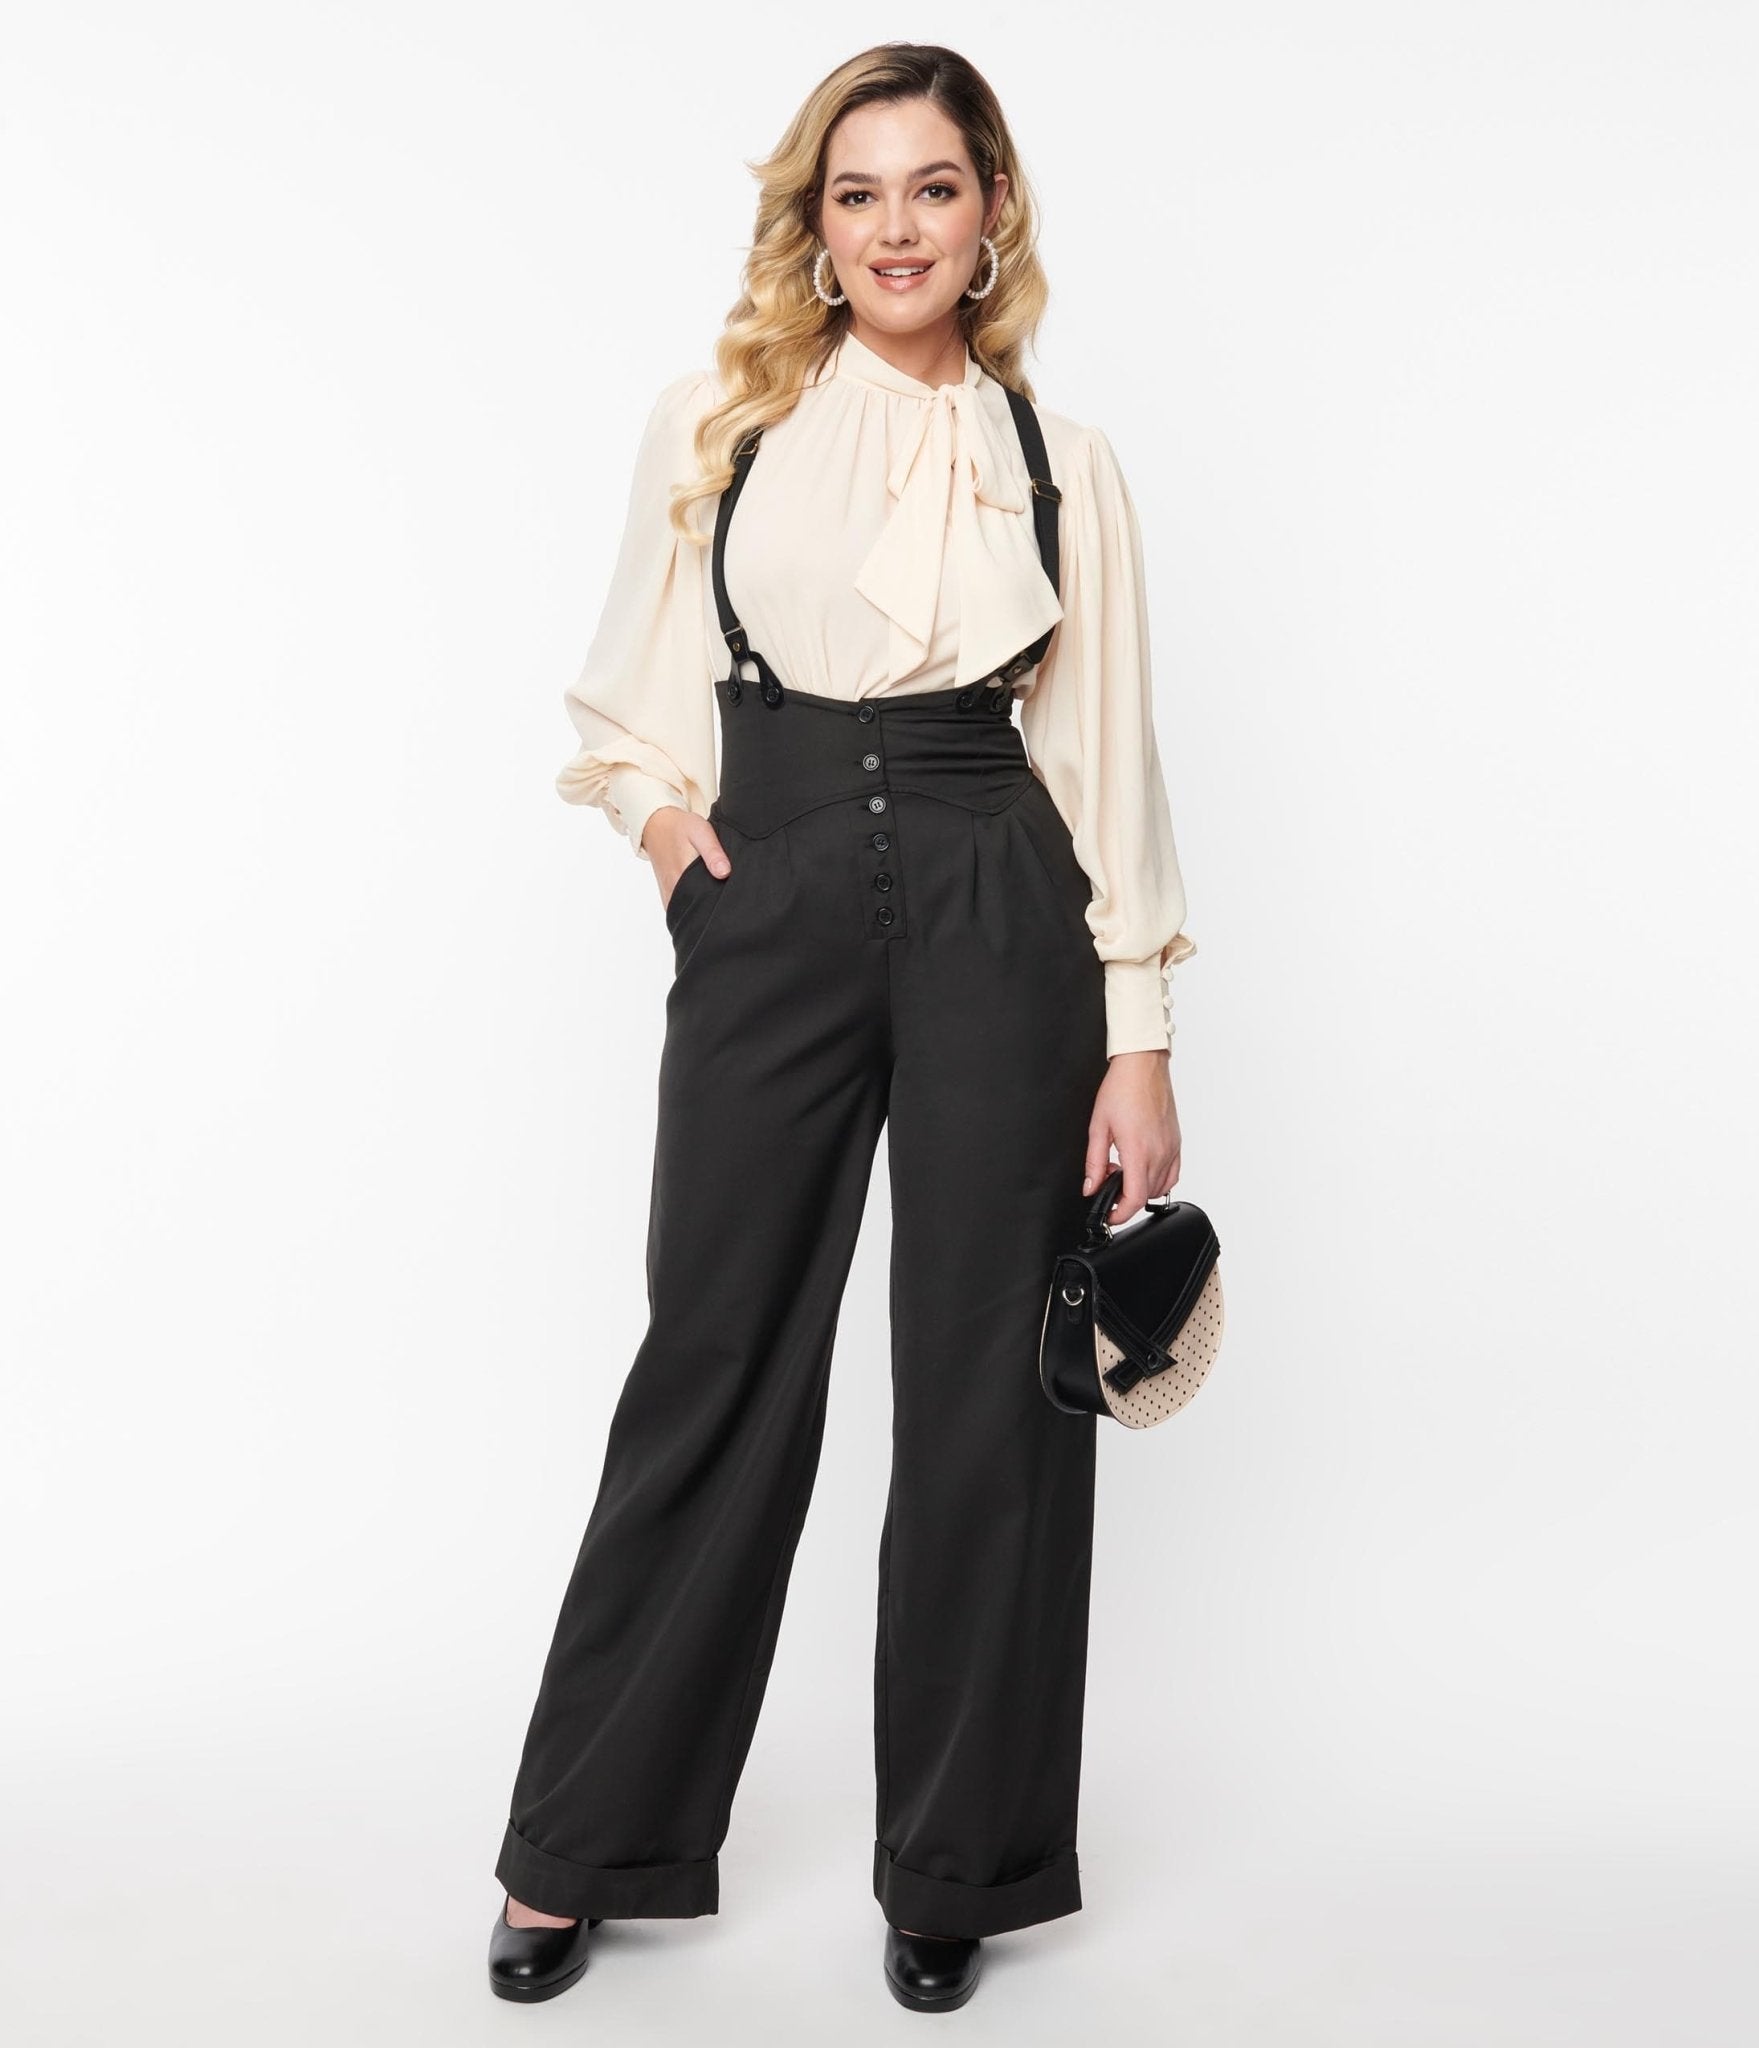 Gangster Costumes & Mafia Outfits | Gangster Girls and Guys Unique Vintage 1930S Black Thelma Suspender Pants $84.00 AT vintagedancer.com